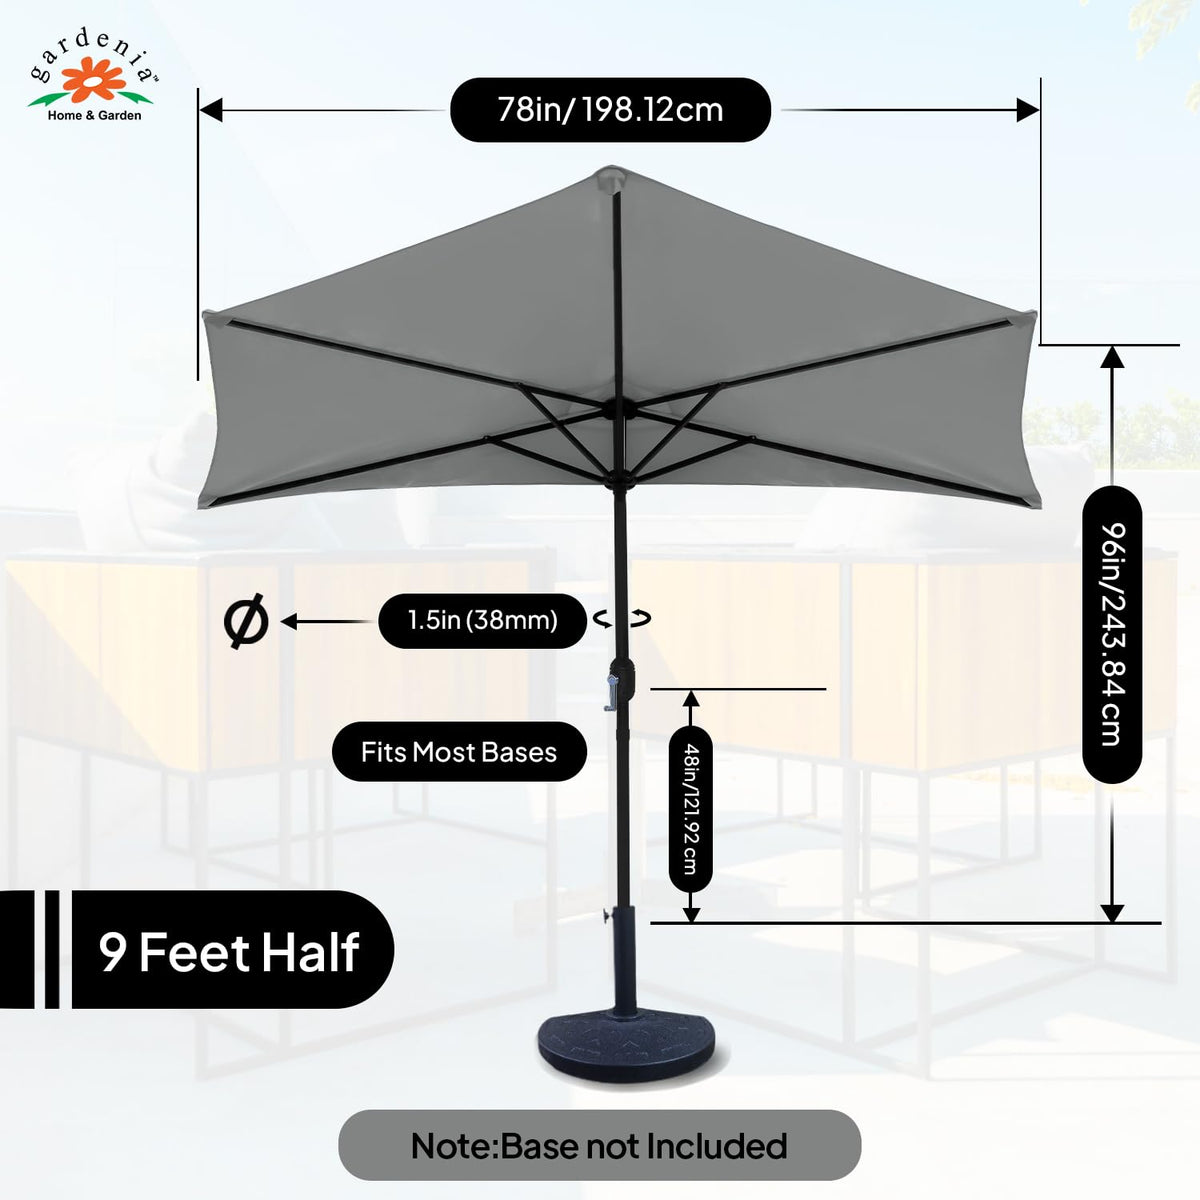 9ft Half Patio Umbrella Without Base - Gray